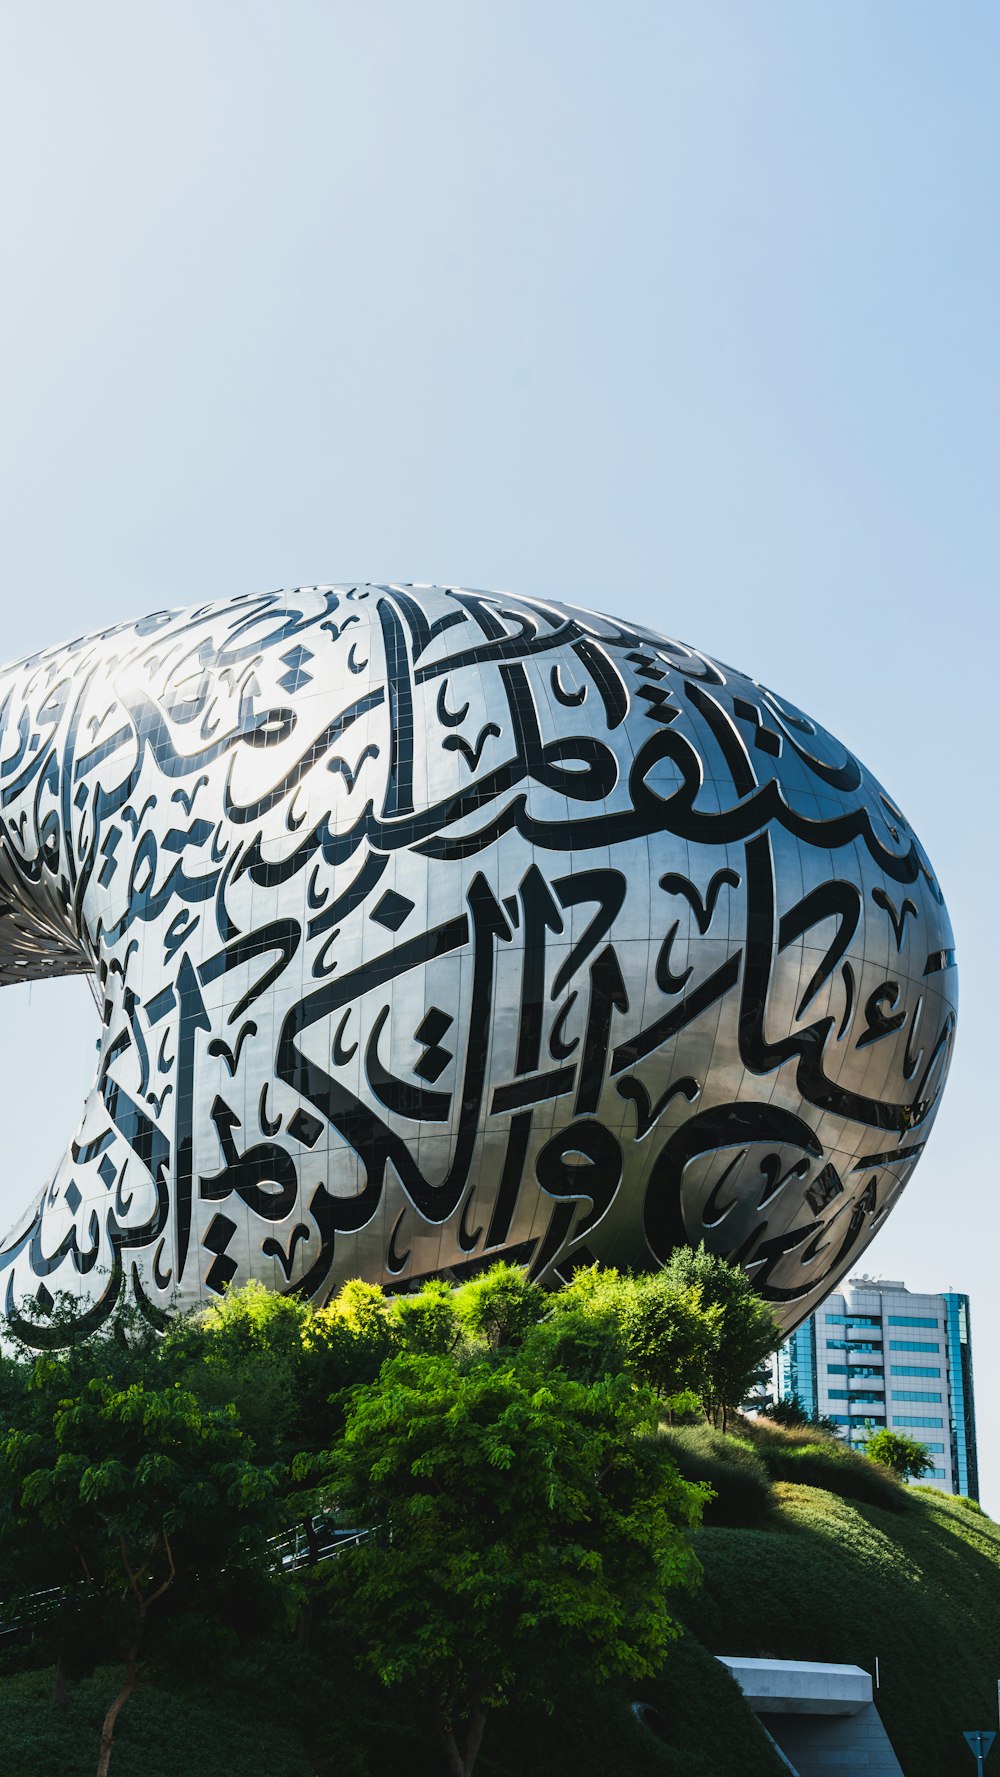 a large metal object with arabic writing on it